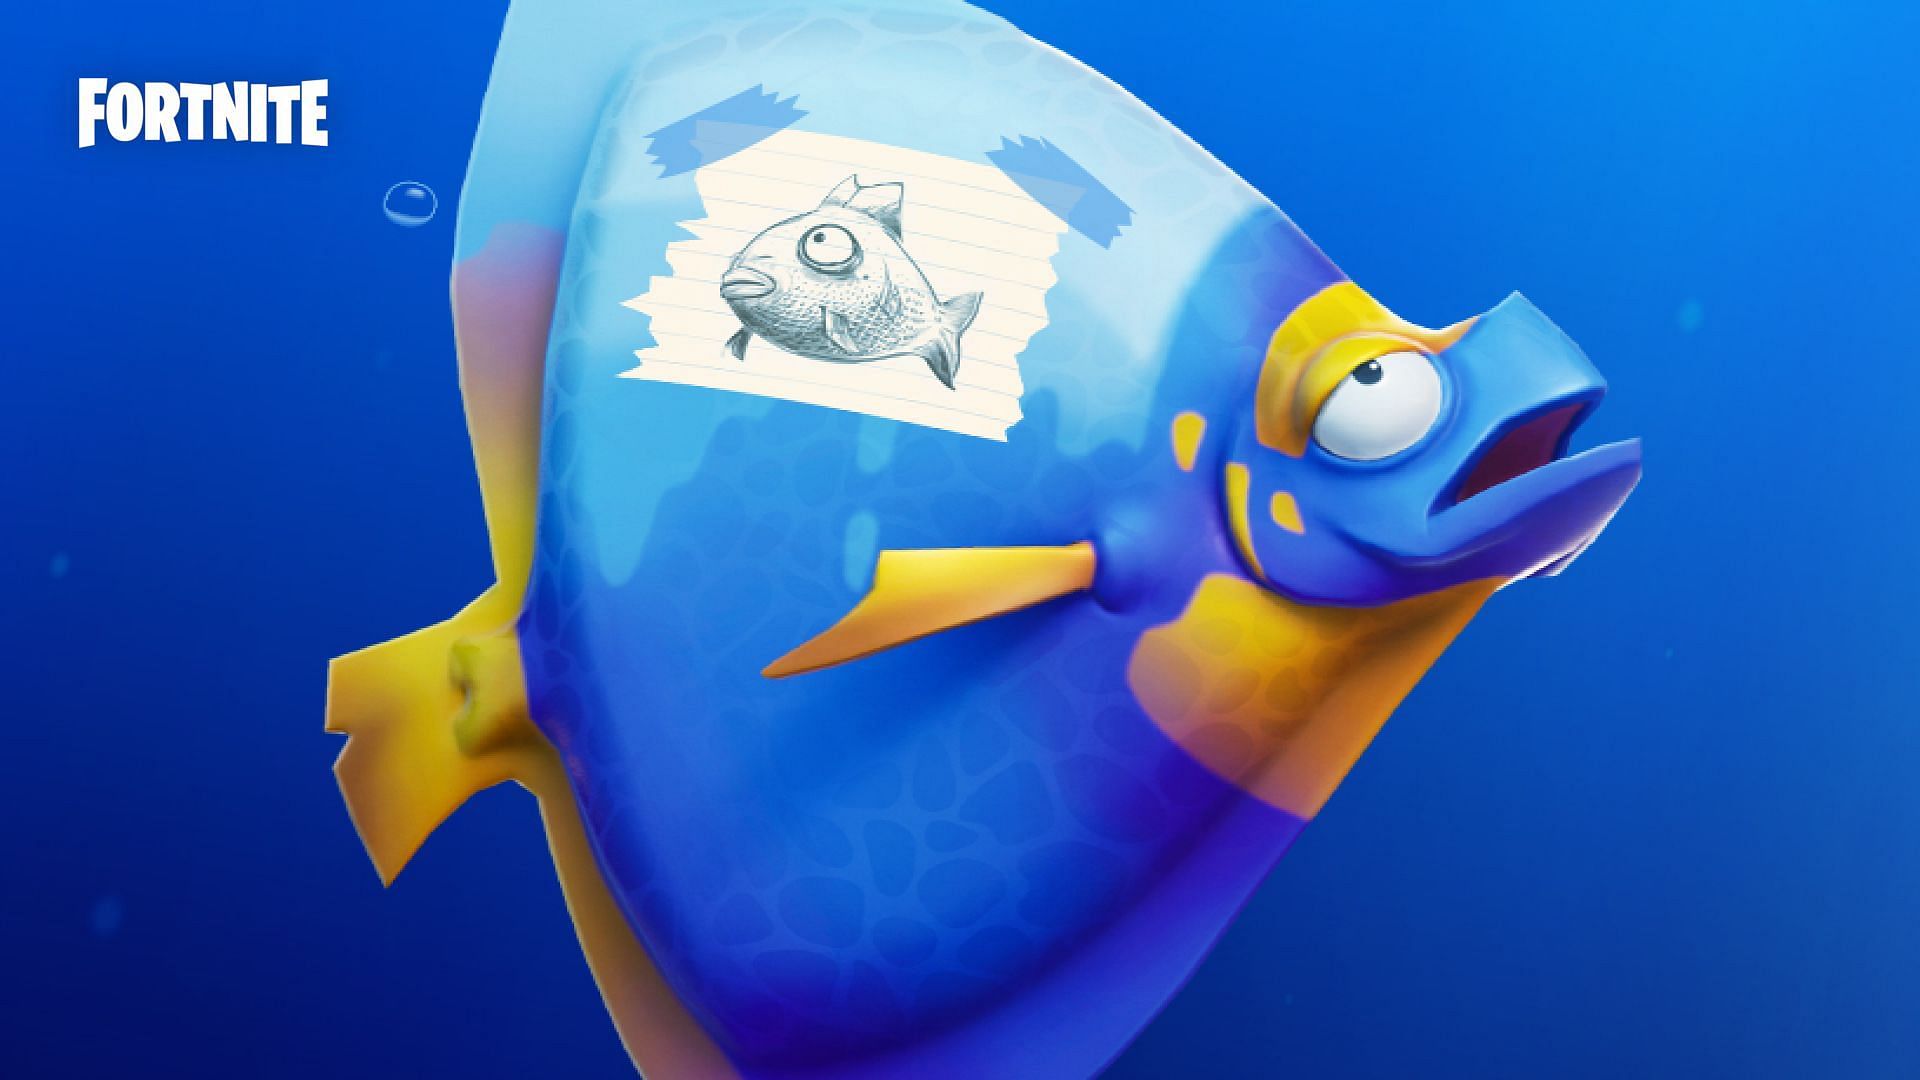 The Fortnite cryptic fish teasers are likely related to &quot;Poisson D